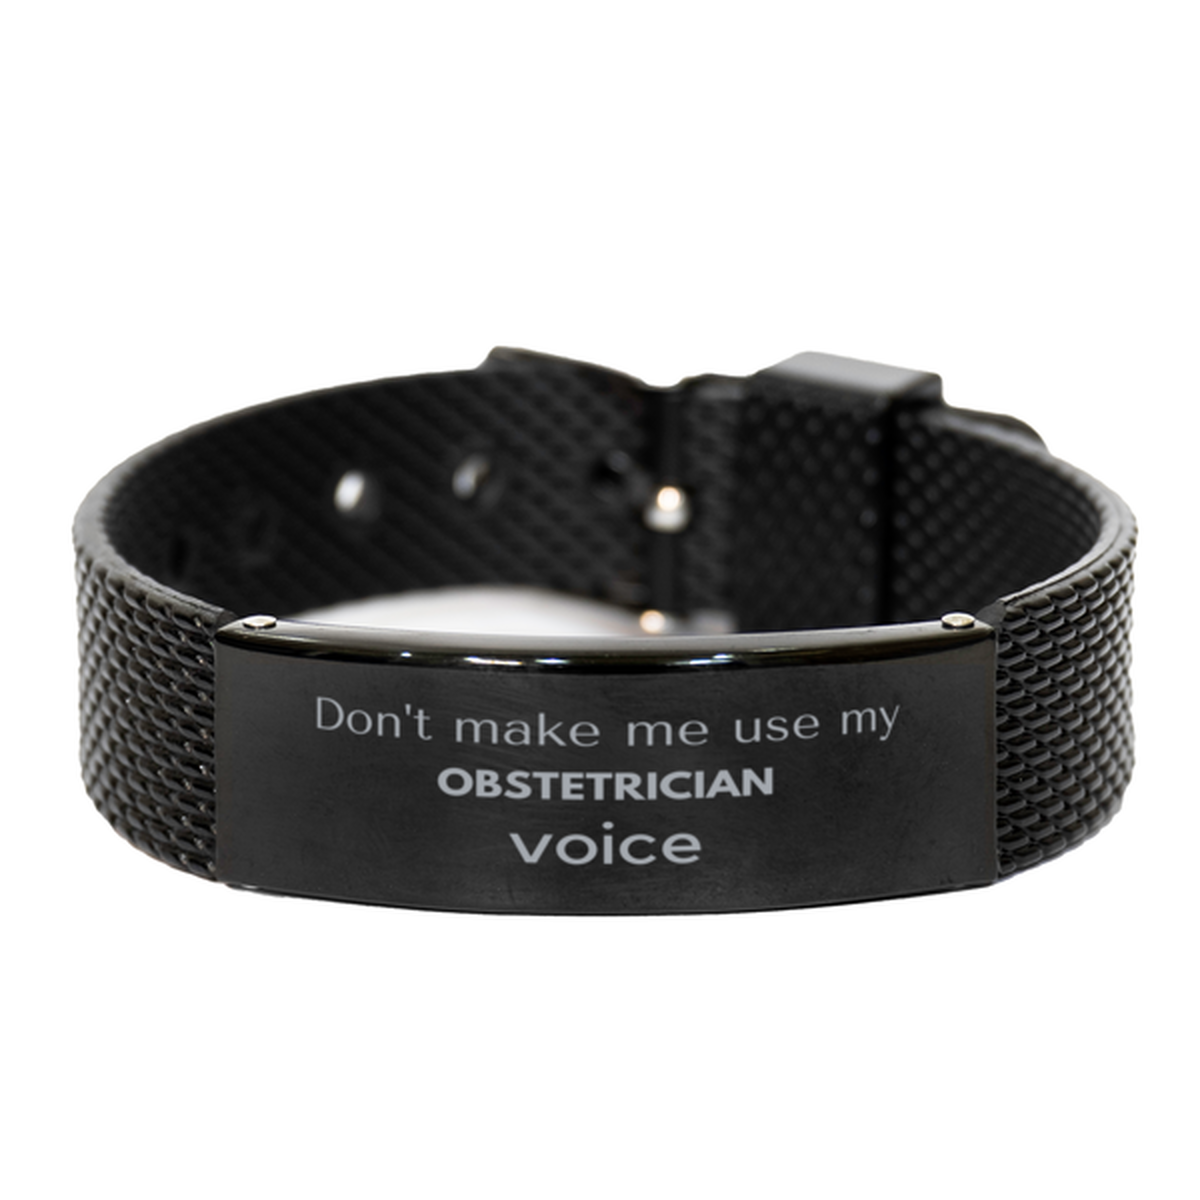 Don't make me use my Obstetrician voice, Sarcasm Obstetrician Gifts, Christmas Obstetrician Black Shark Mesh Bracelet Birthday Unique Gifts For Obstetrician Coworkers, Men, Women, Colleague, Friends